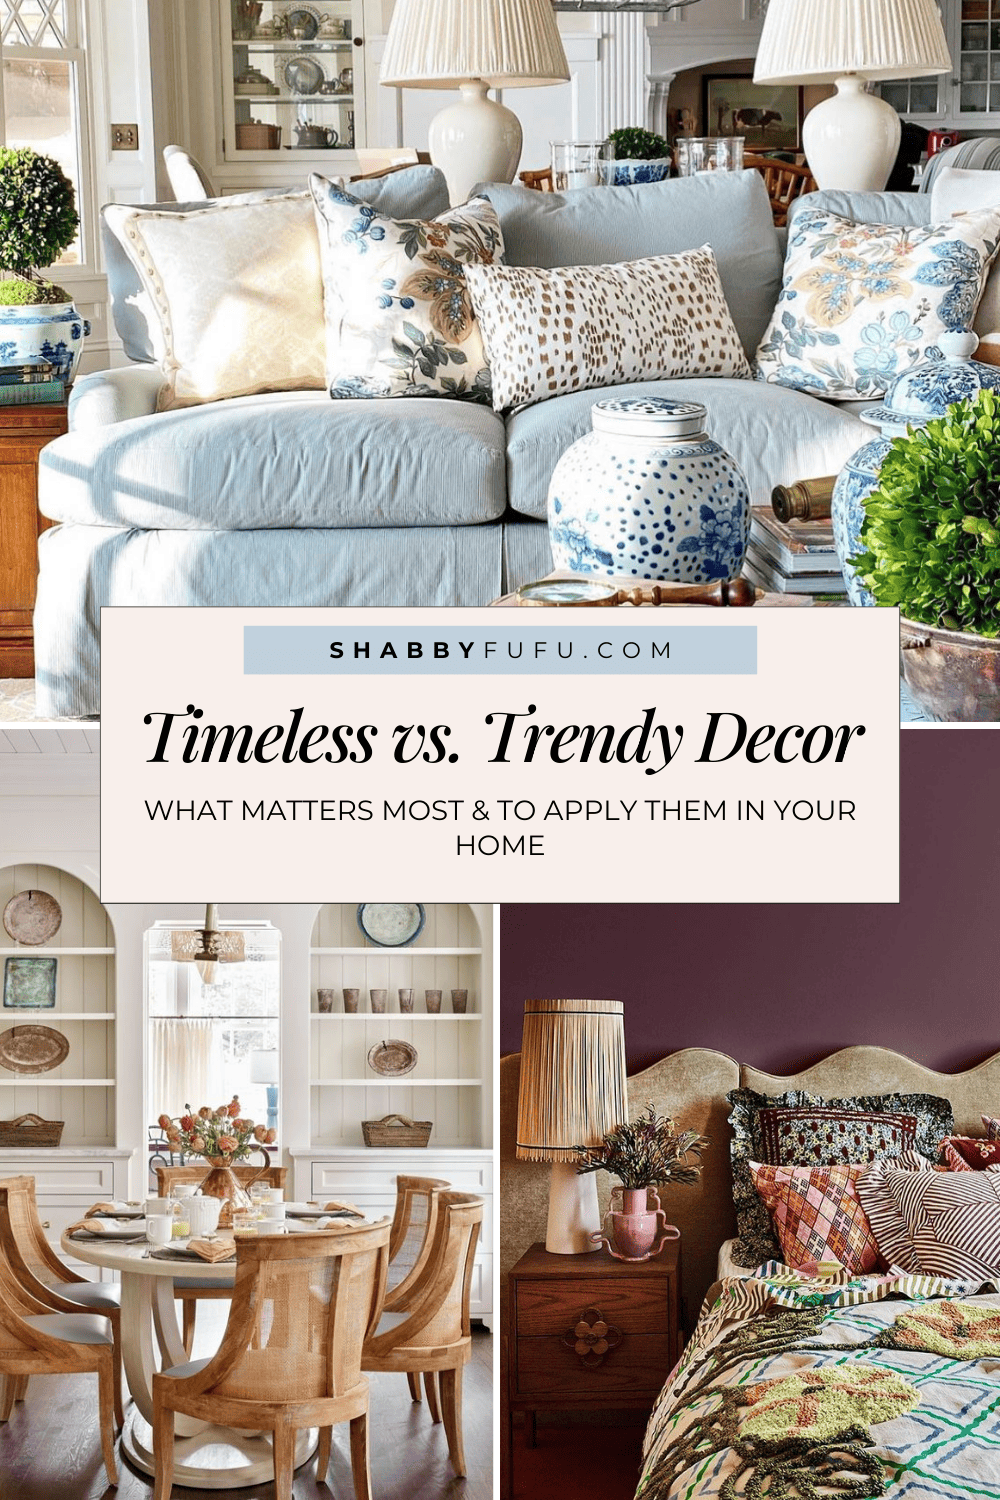 Pinterest collage featuring different indoor homes with the title "Timeless vs. Trendy decor"